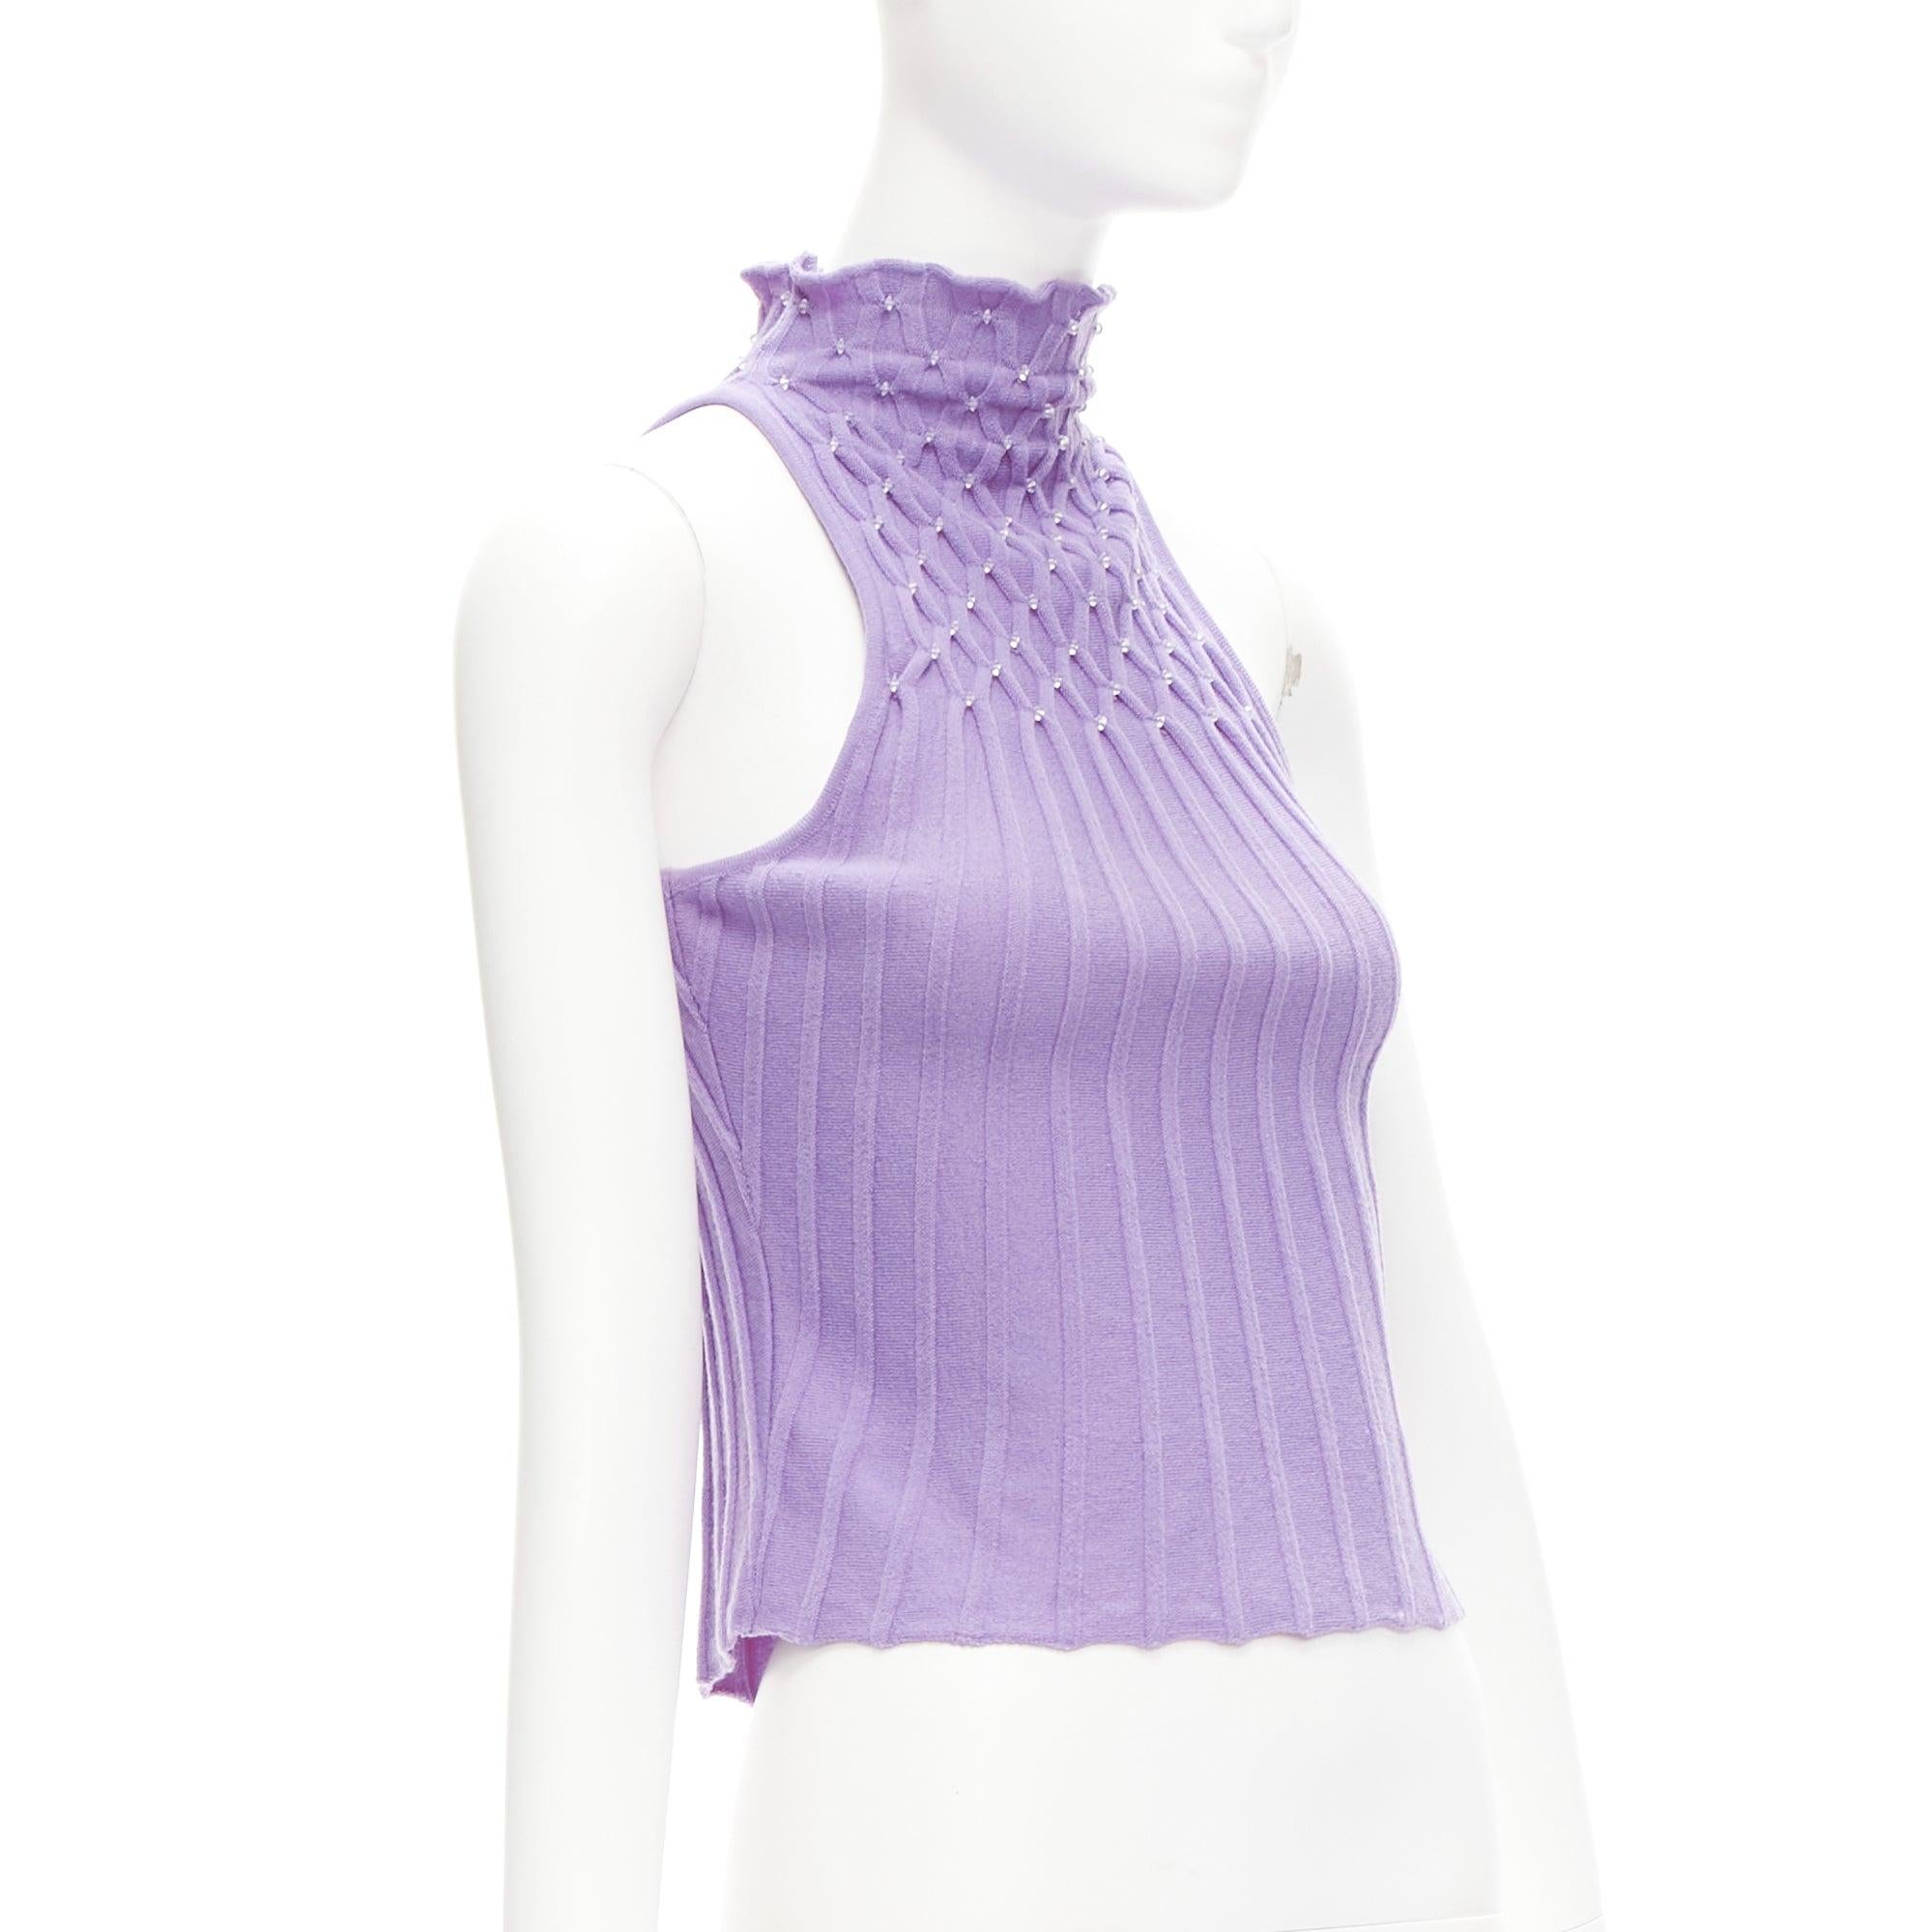 GIANNI VERSACE Vintage purple wool jewel bead embellished crop turtleneck IT38 XS
Reference: TGAS/D00984
Brand: Gianni Versace
Designer: Gianni Versace
Material: Wool, Blend
Color: Purple
Pattern: Solid
Made in: Italy

CONDITION:
Condition: Very